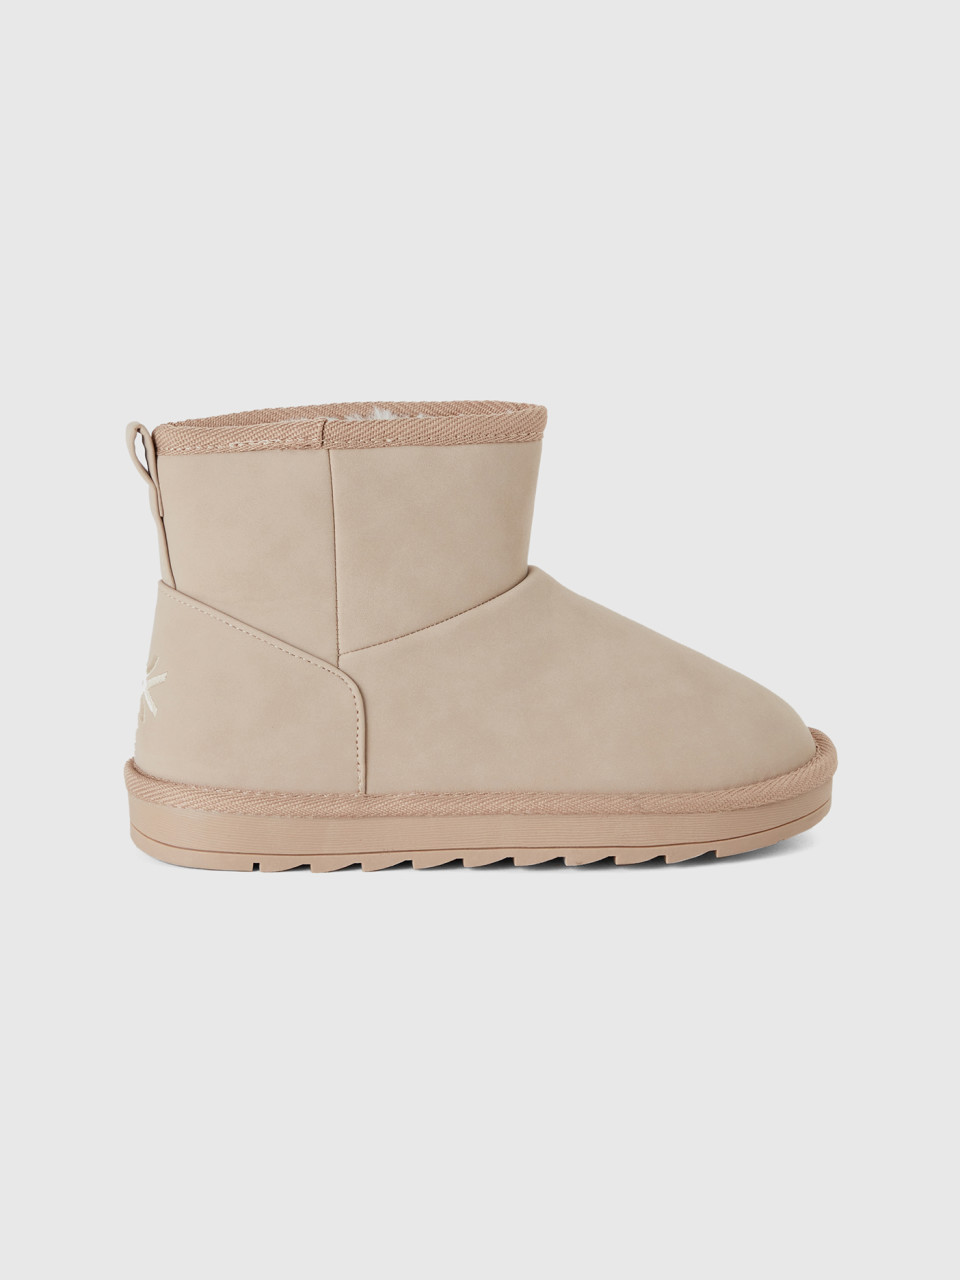 Benetton, Ankle Boots In Imitation Leather, Beige, Kids